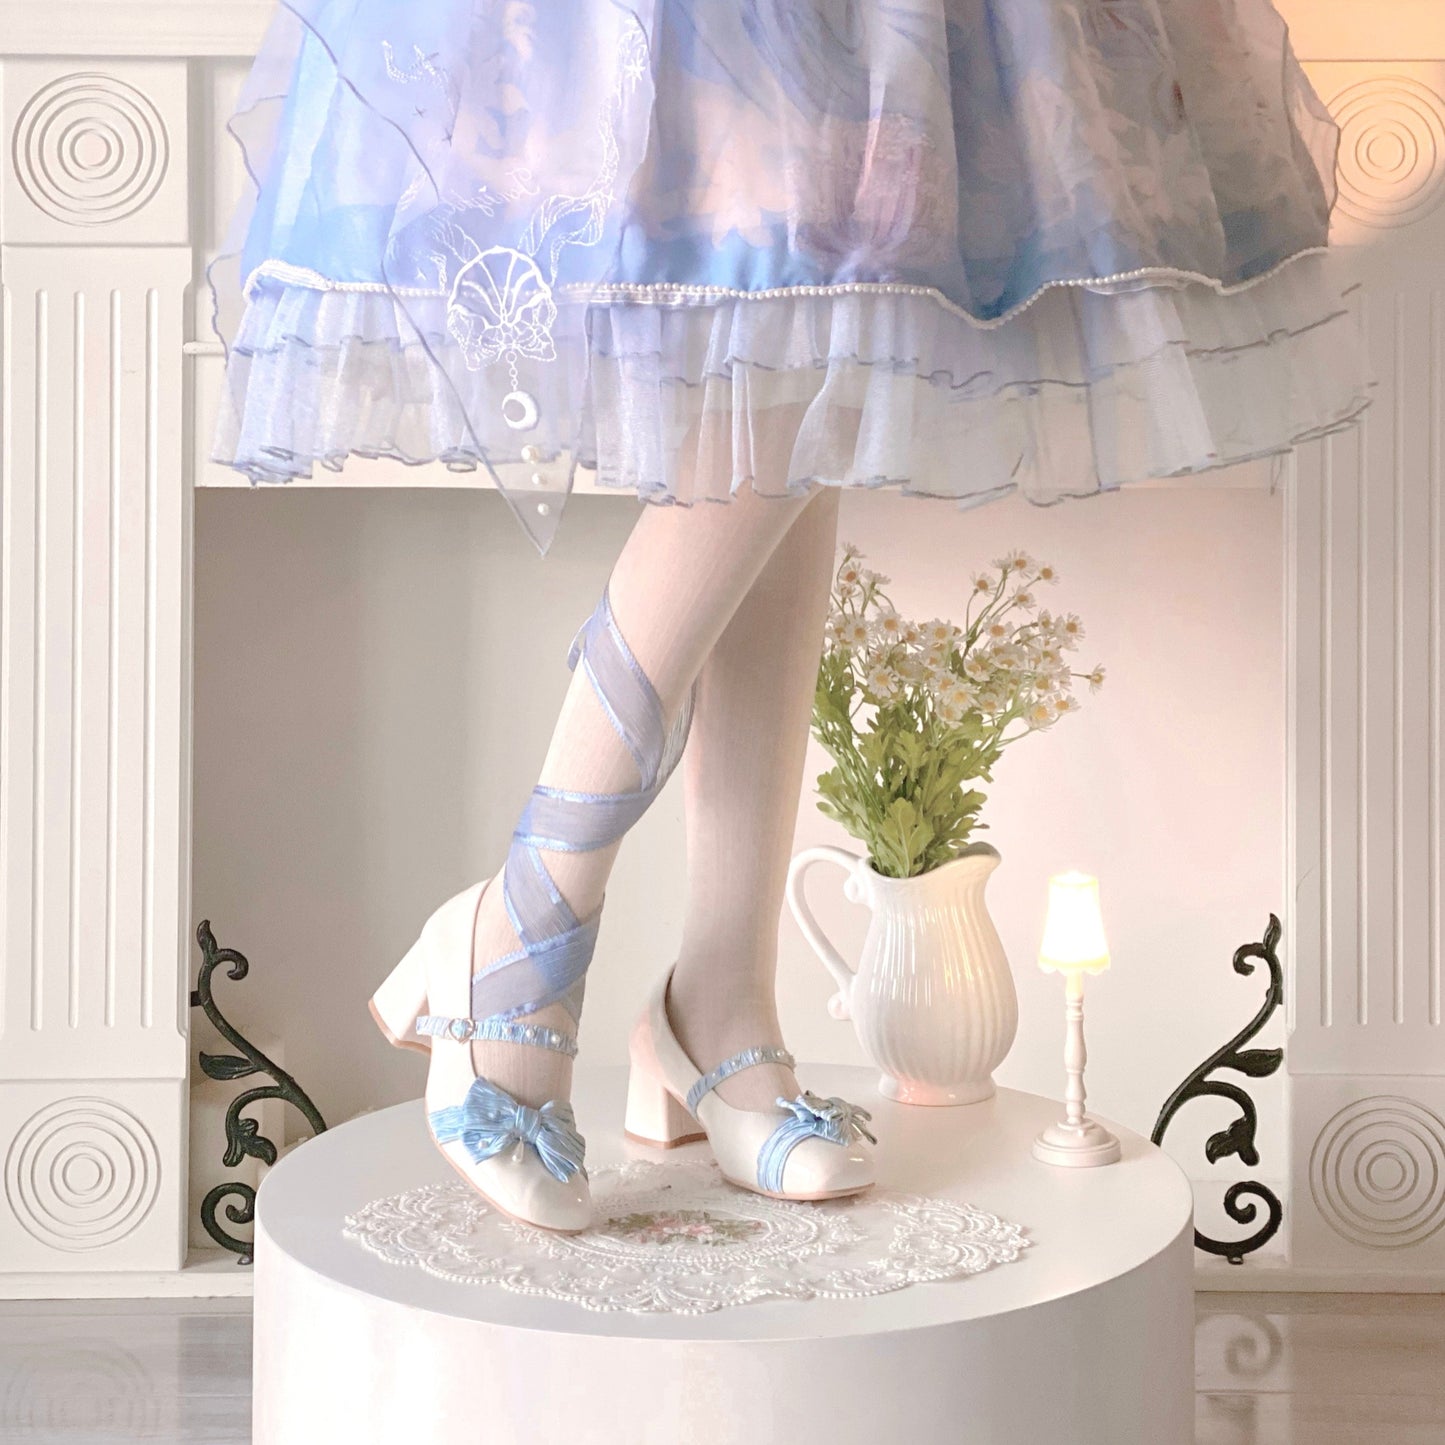 ♡ Butterfly Pastry ♡ - Mid-Heel Shoes